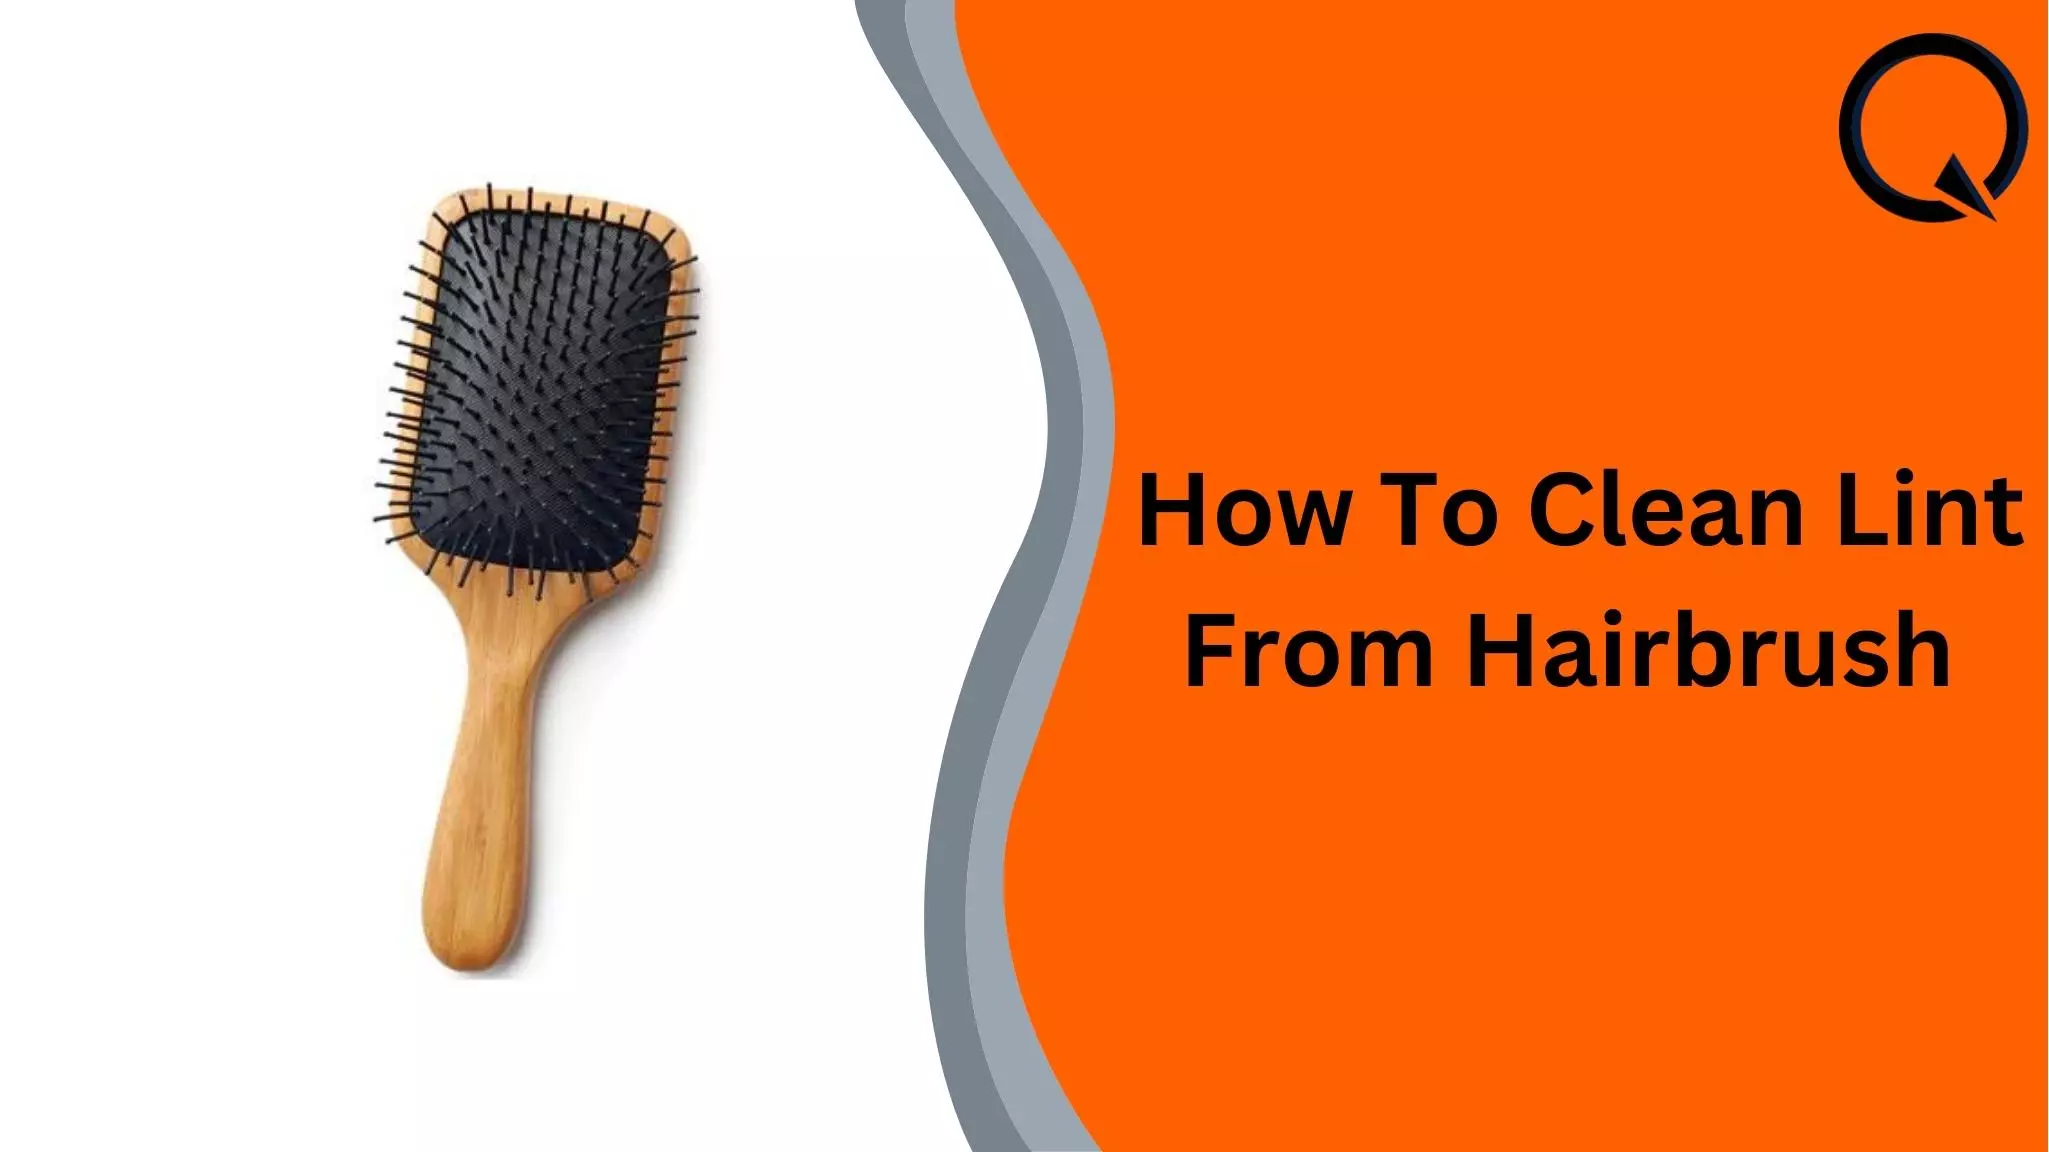 How To Clean Lint From Hairbrush